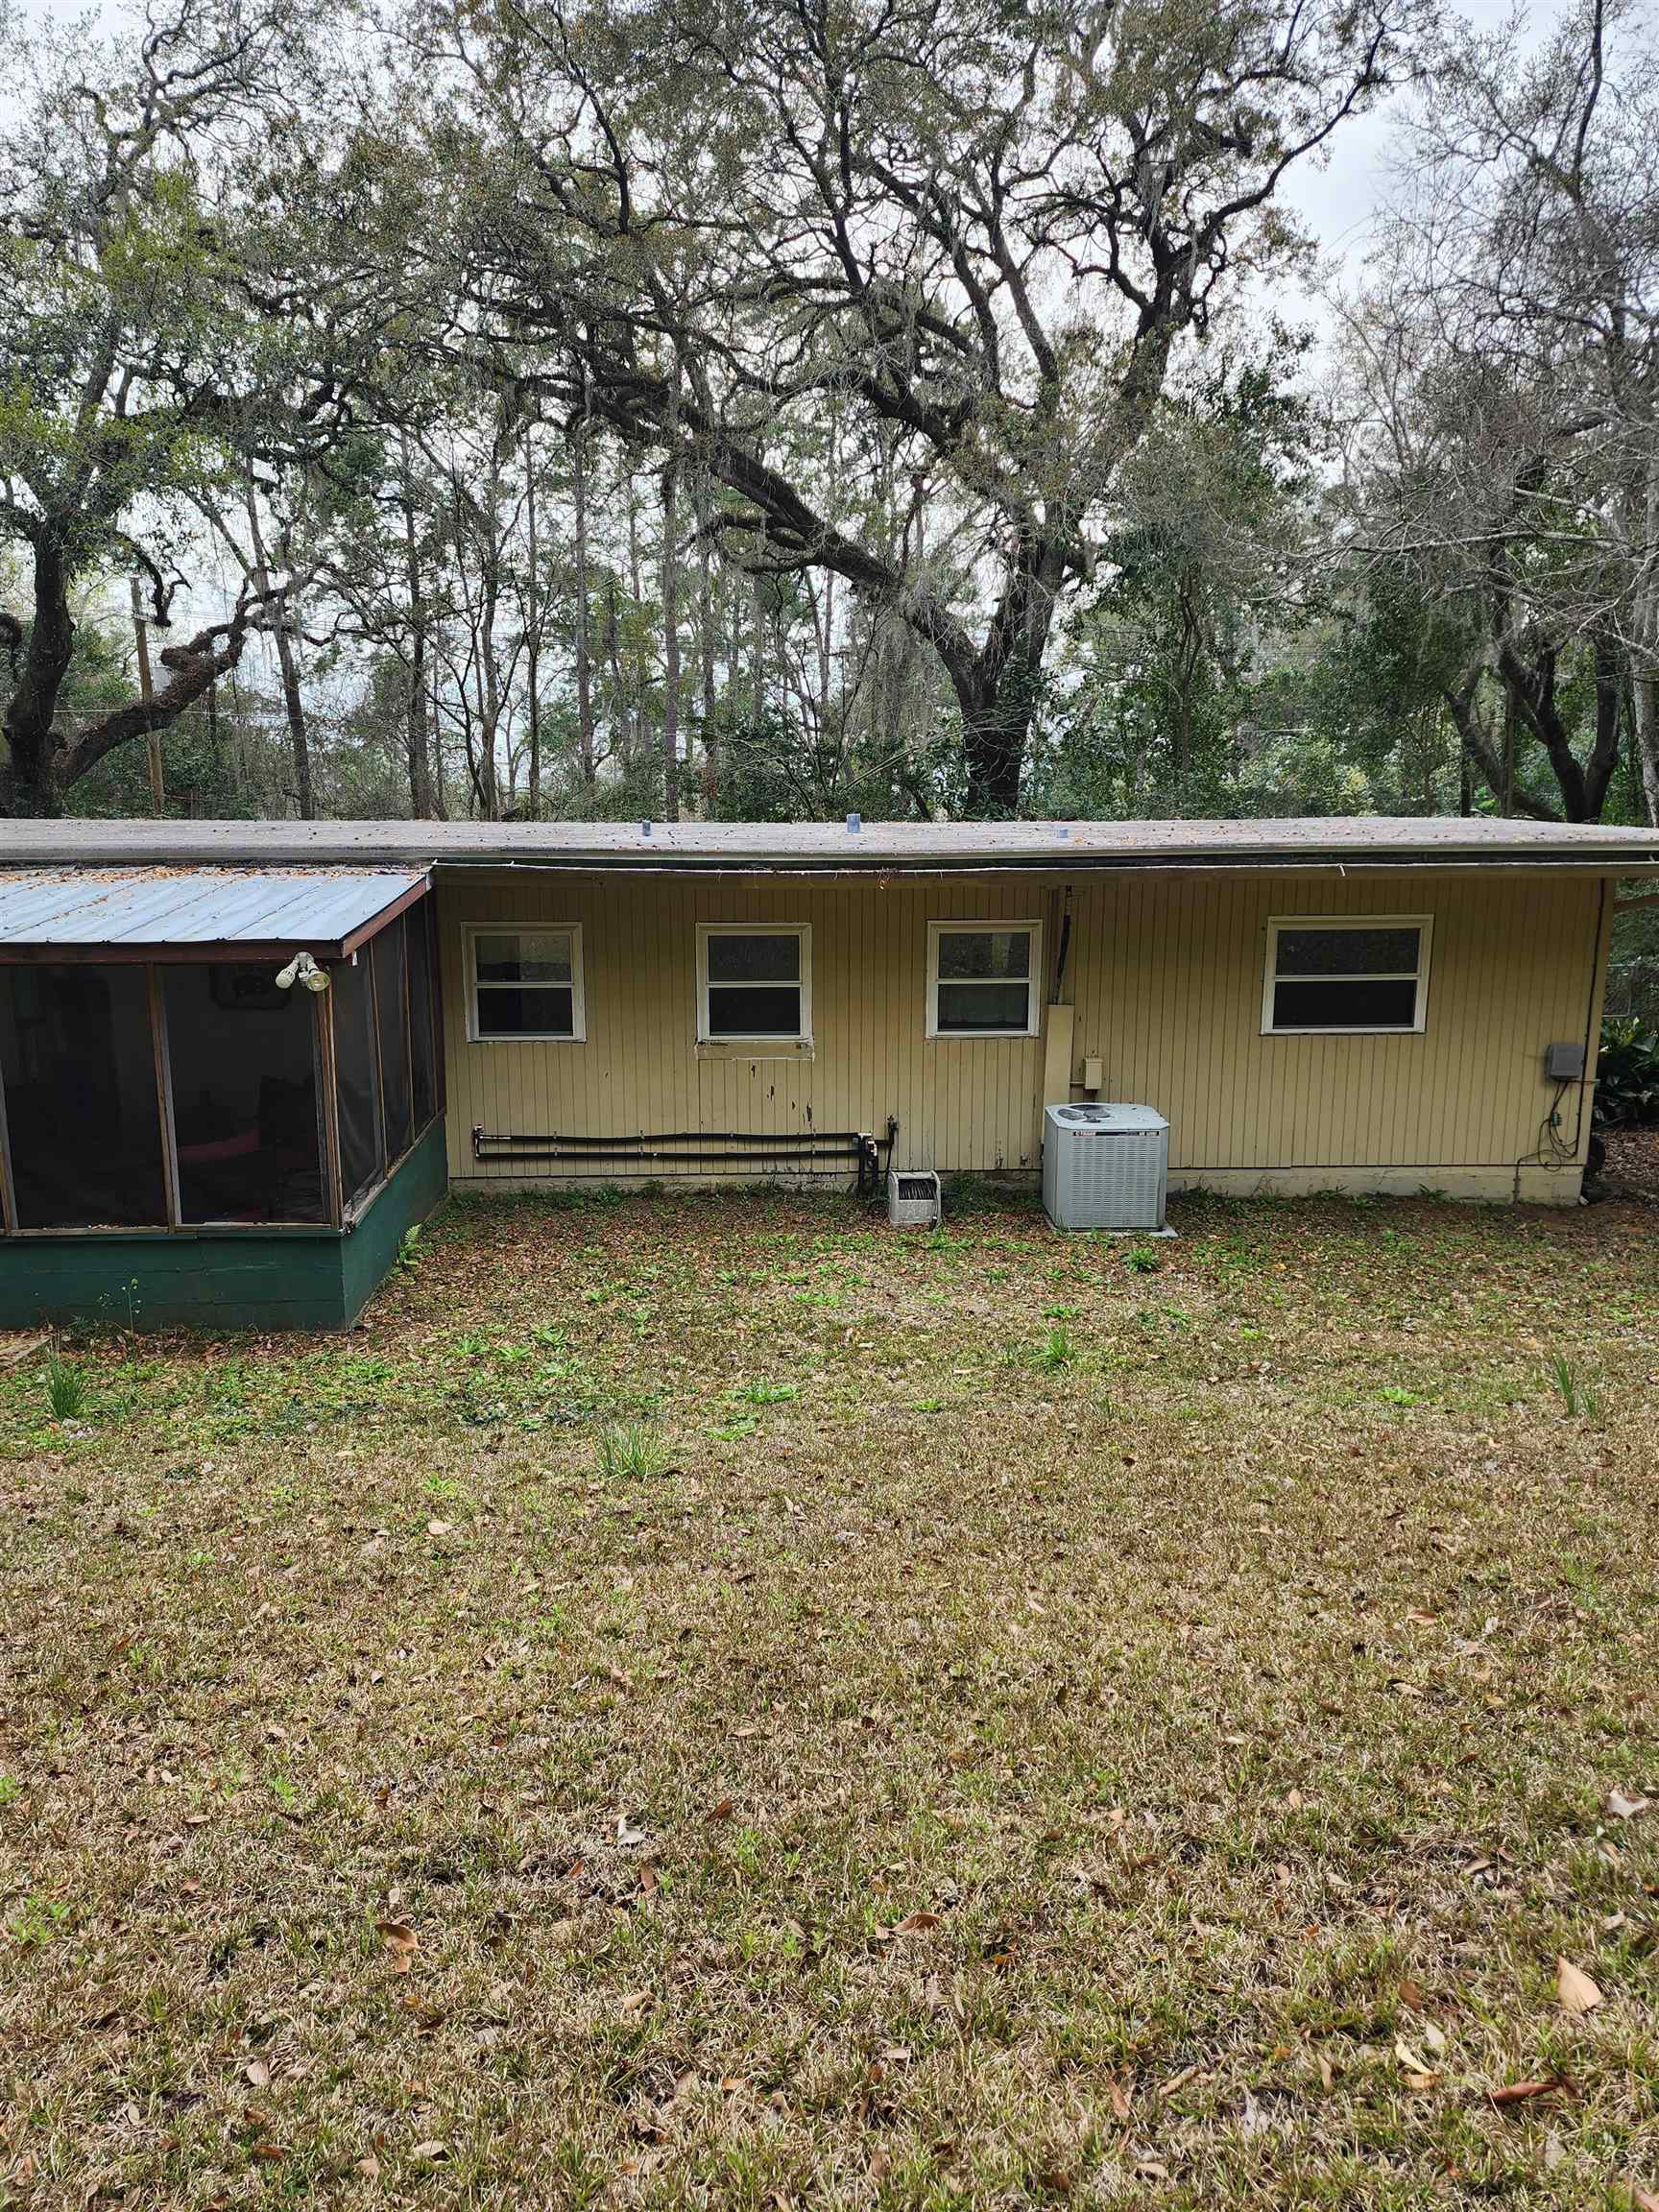 2204 Mission Road,TALLAHASSEE,Florida 32304,4 Bedrooms Bedrooms,2 BathroomsBathrooms,Detached single family,2204 Mission Road,369717